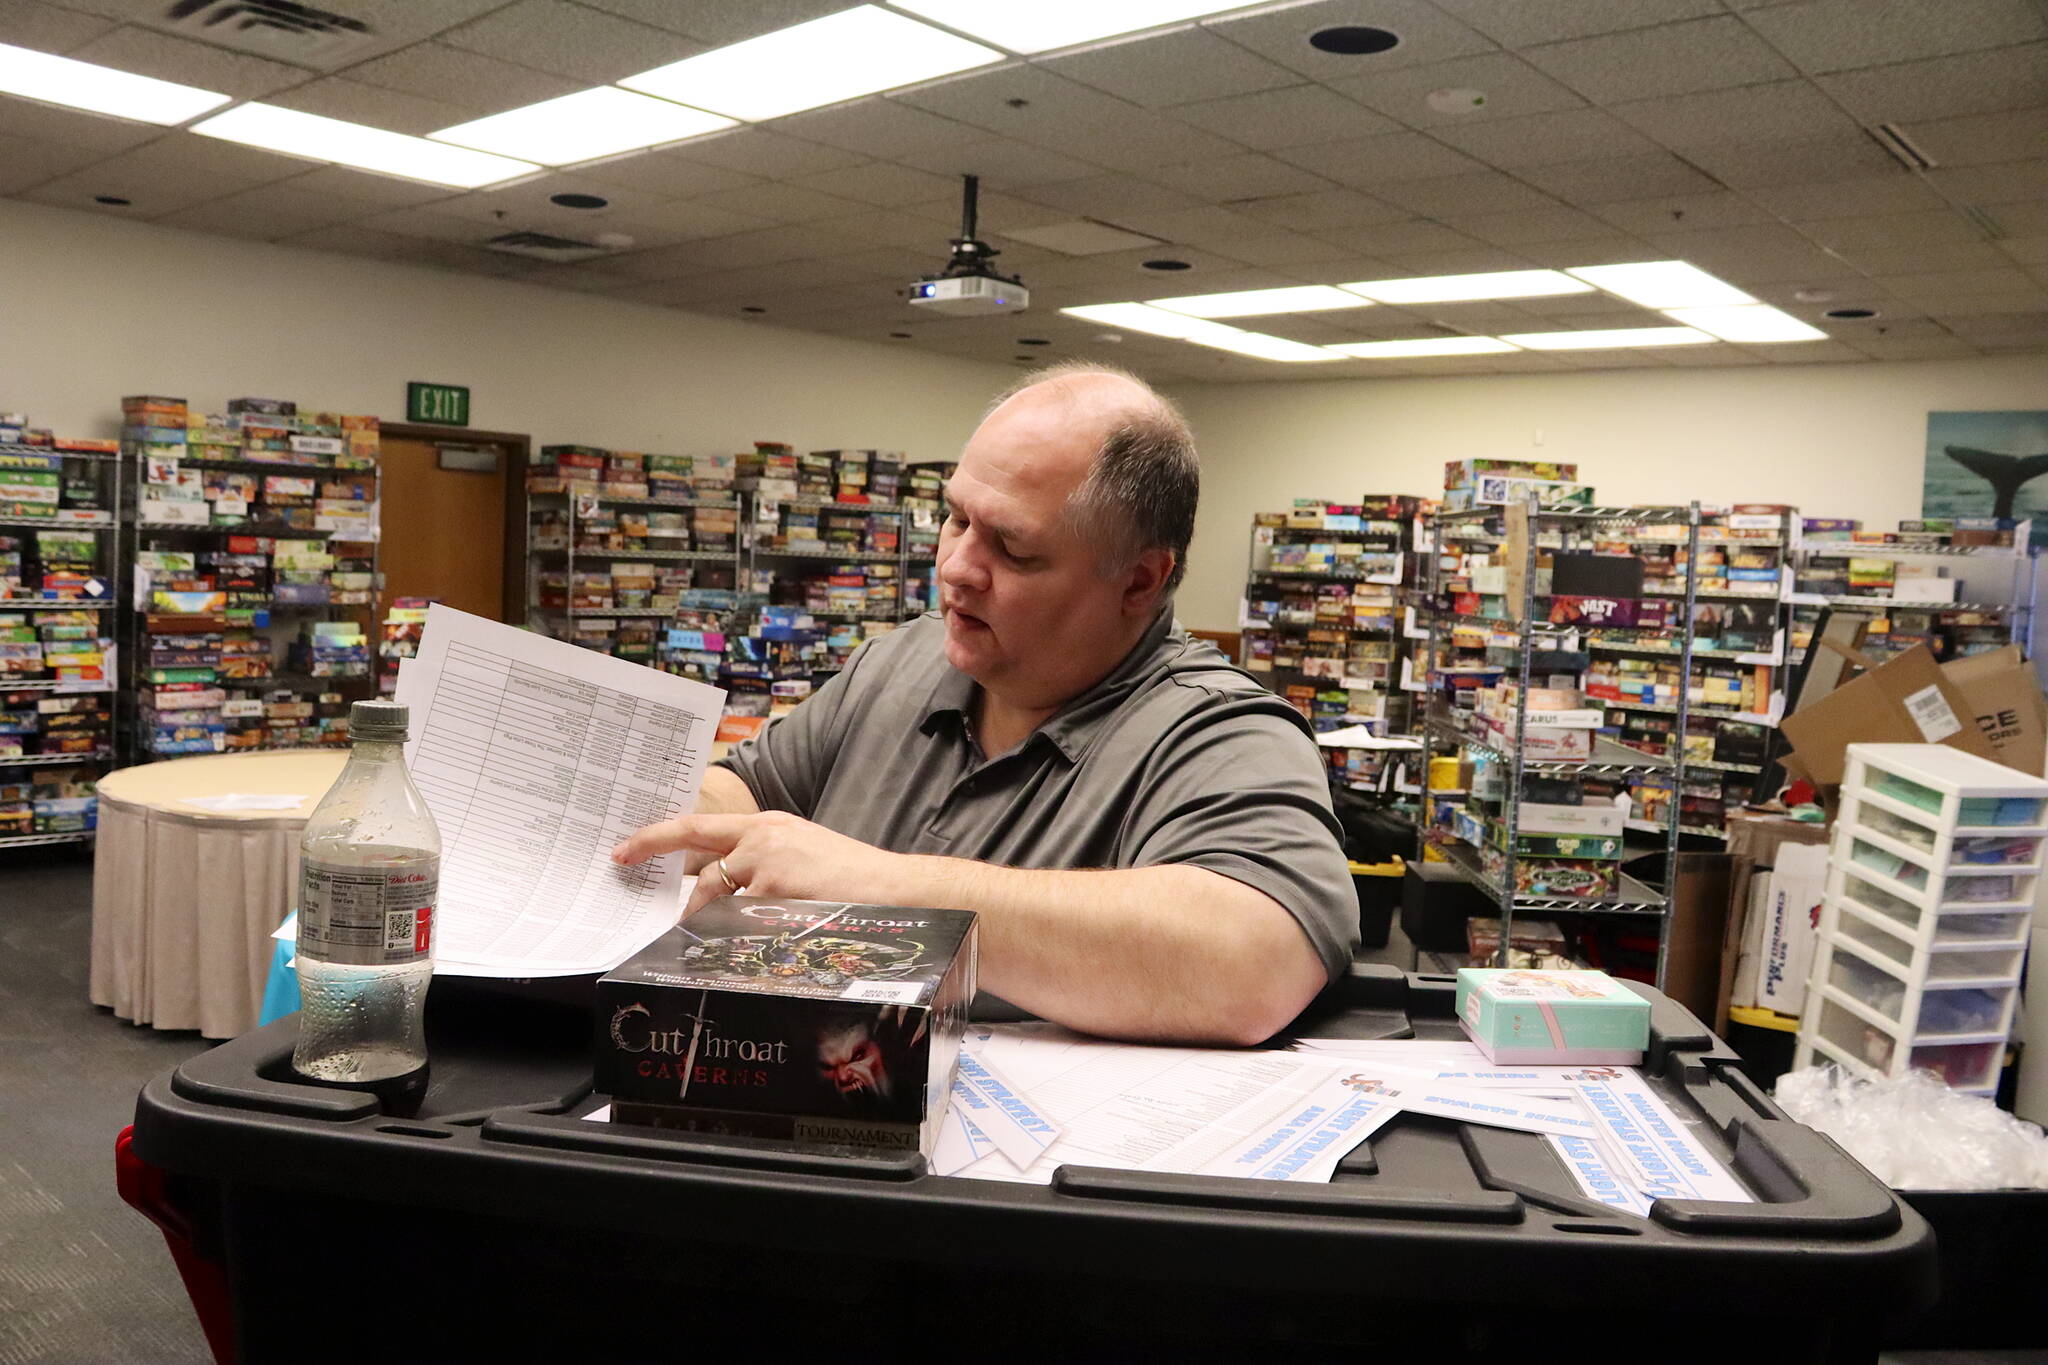 Jared Yancy checks off games on an inventory list in preparation Thursday for the Platypus-Con Board and Card Game Extravaganza, scheduled Friday through Sunday at Centennial Hall. (Mark Sabbatini / Juneau Empire)